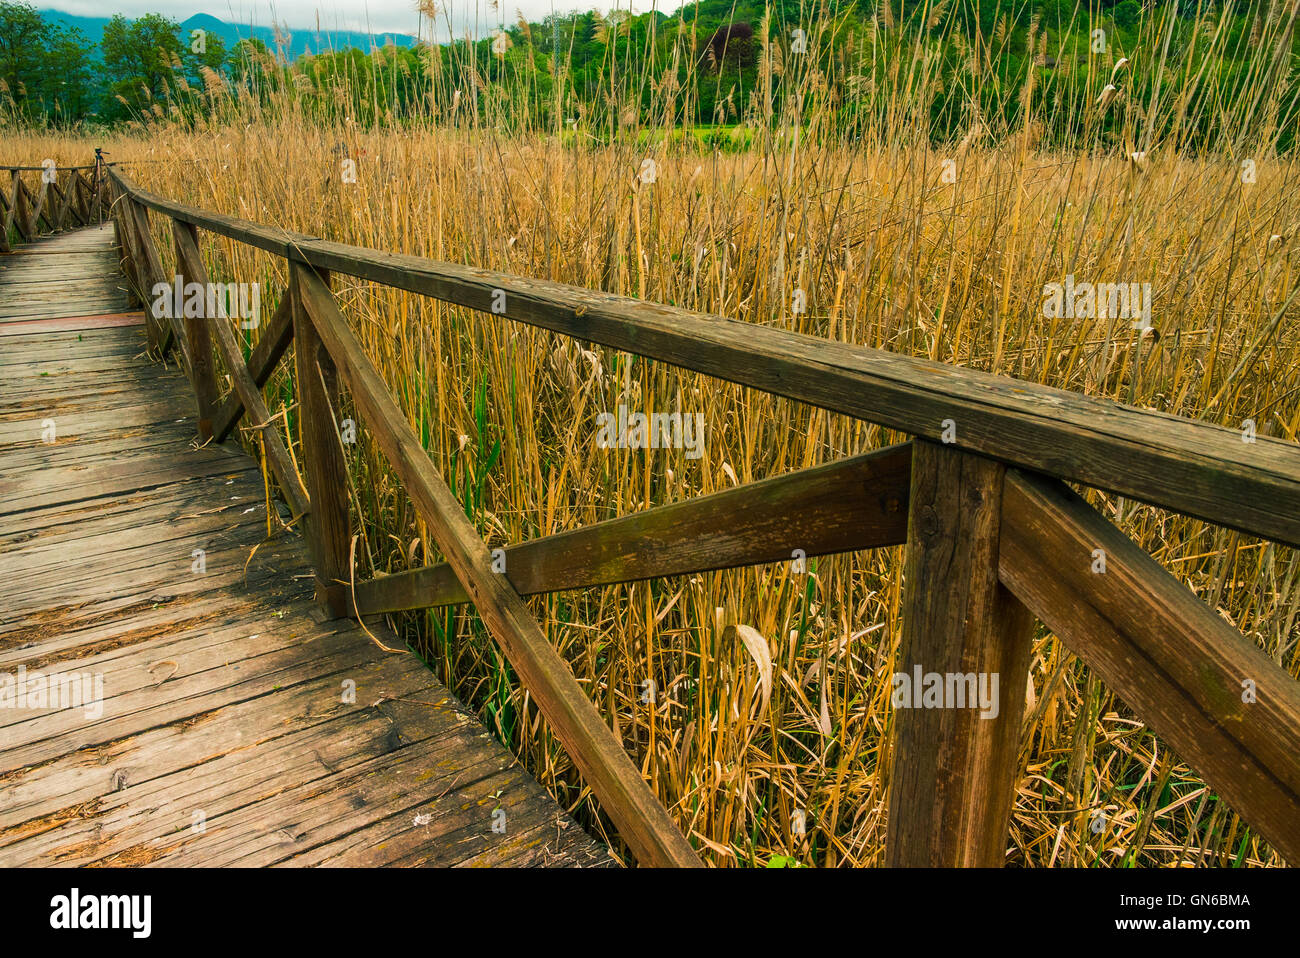 Wooden path on cane thicket and vegetation Stock Photo